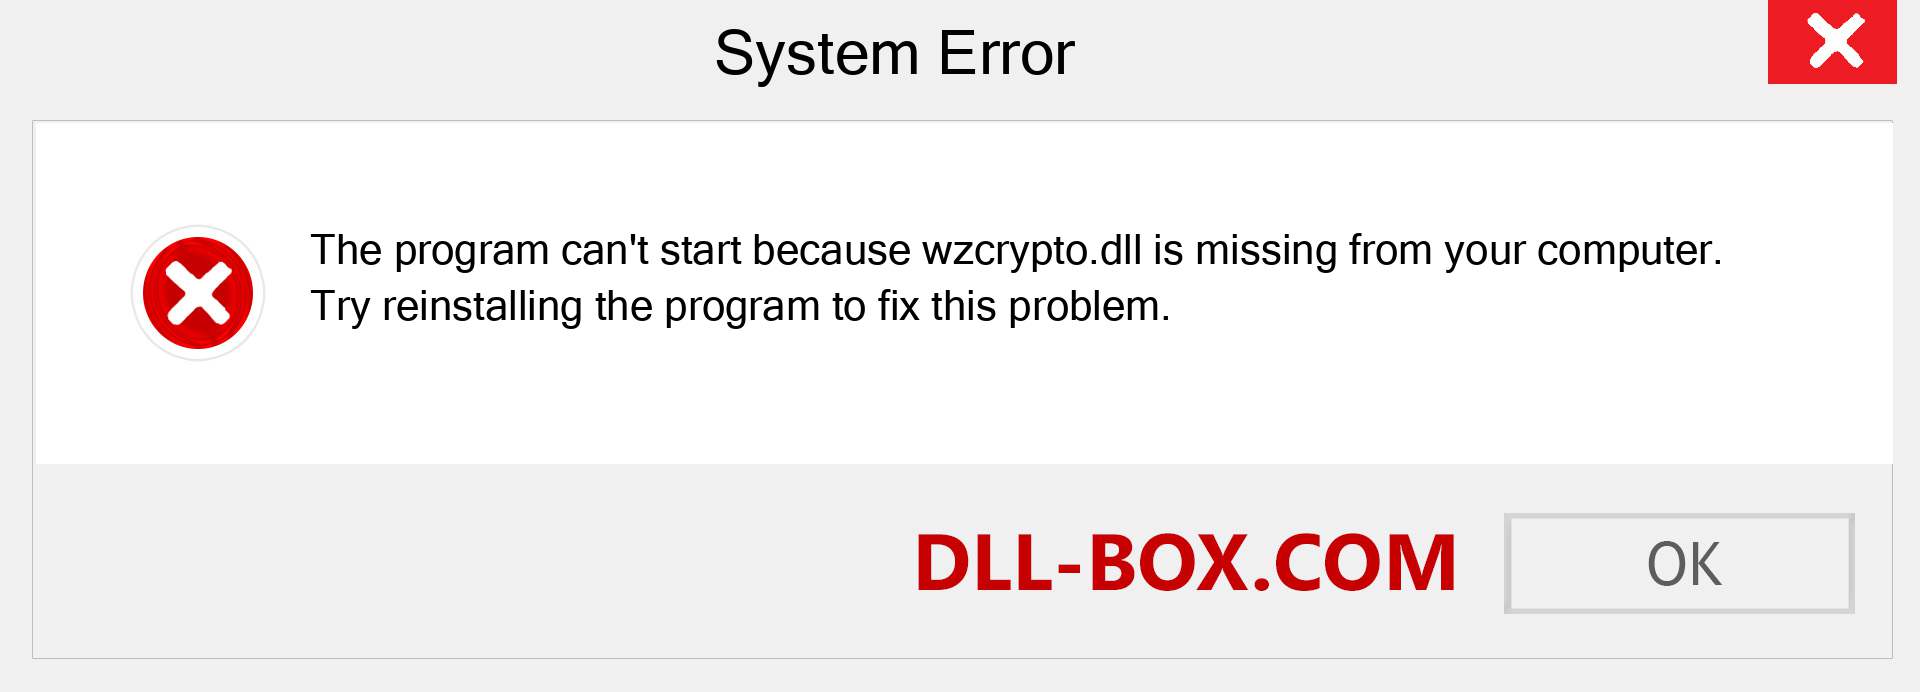  wzcrypto.dll file is missing?. Download for Windows 7, 8, 10 - Fix  wzcrypto dll Missing Error on Windows, photos, images